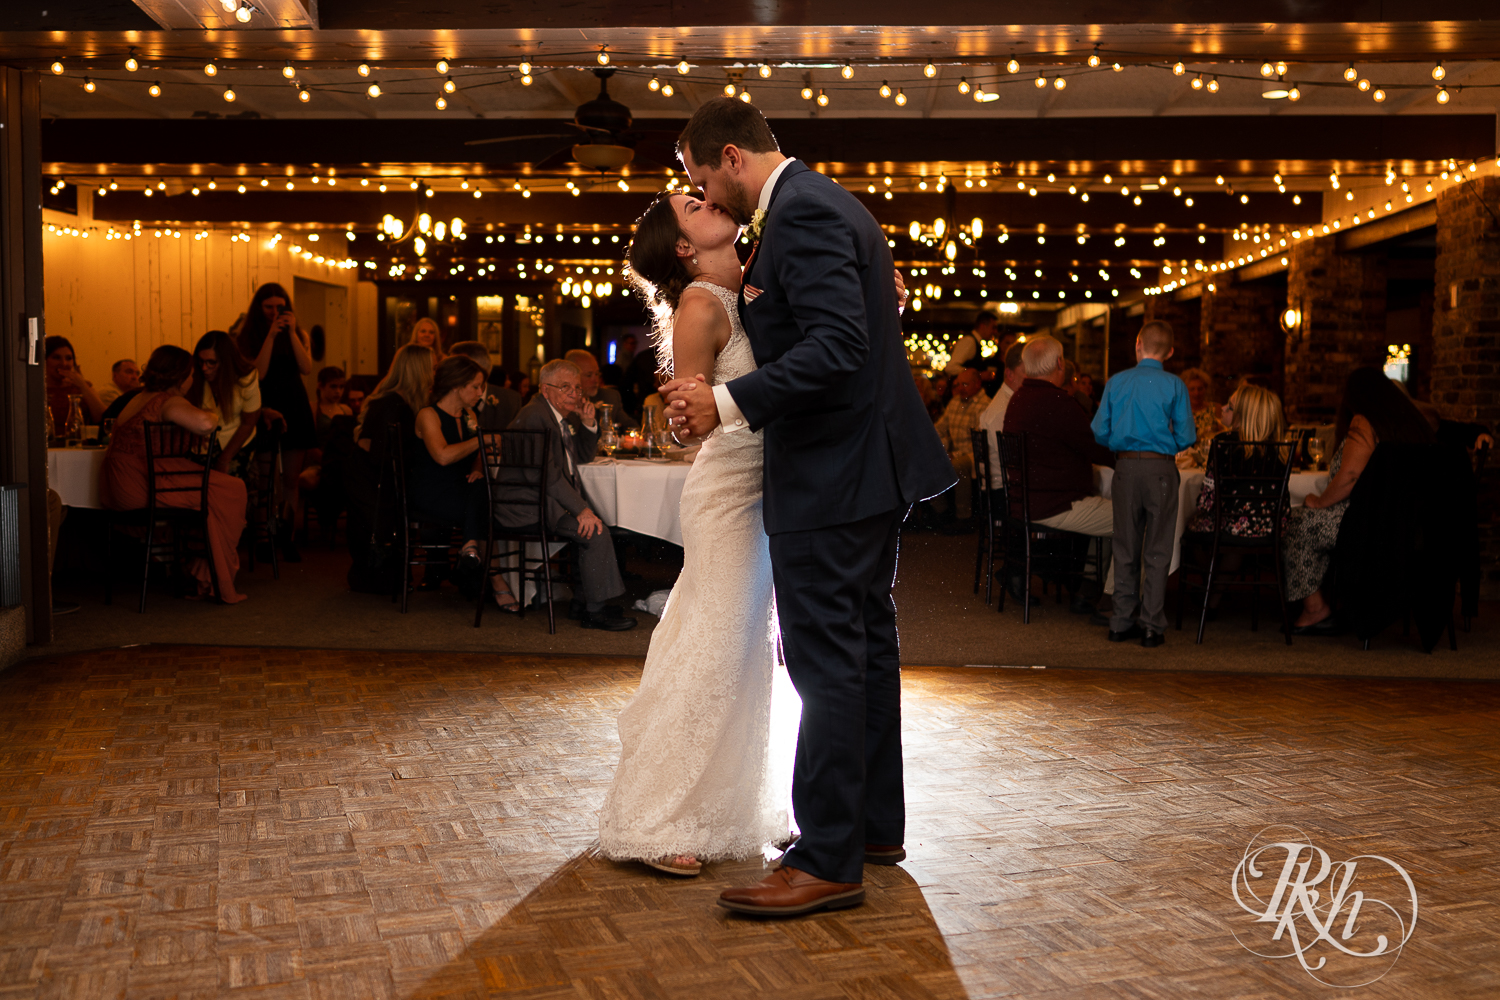 Bride and groom share first dance during wedding reception at The Chart House in Lakeville, Minnesota.